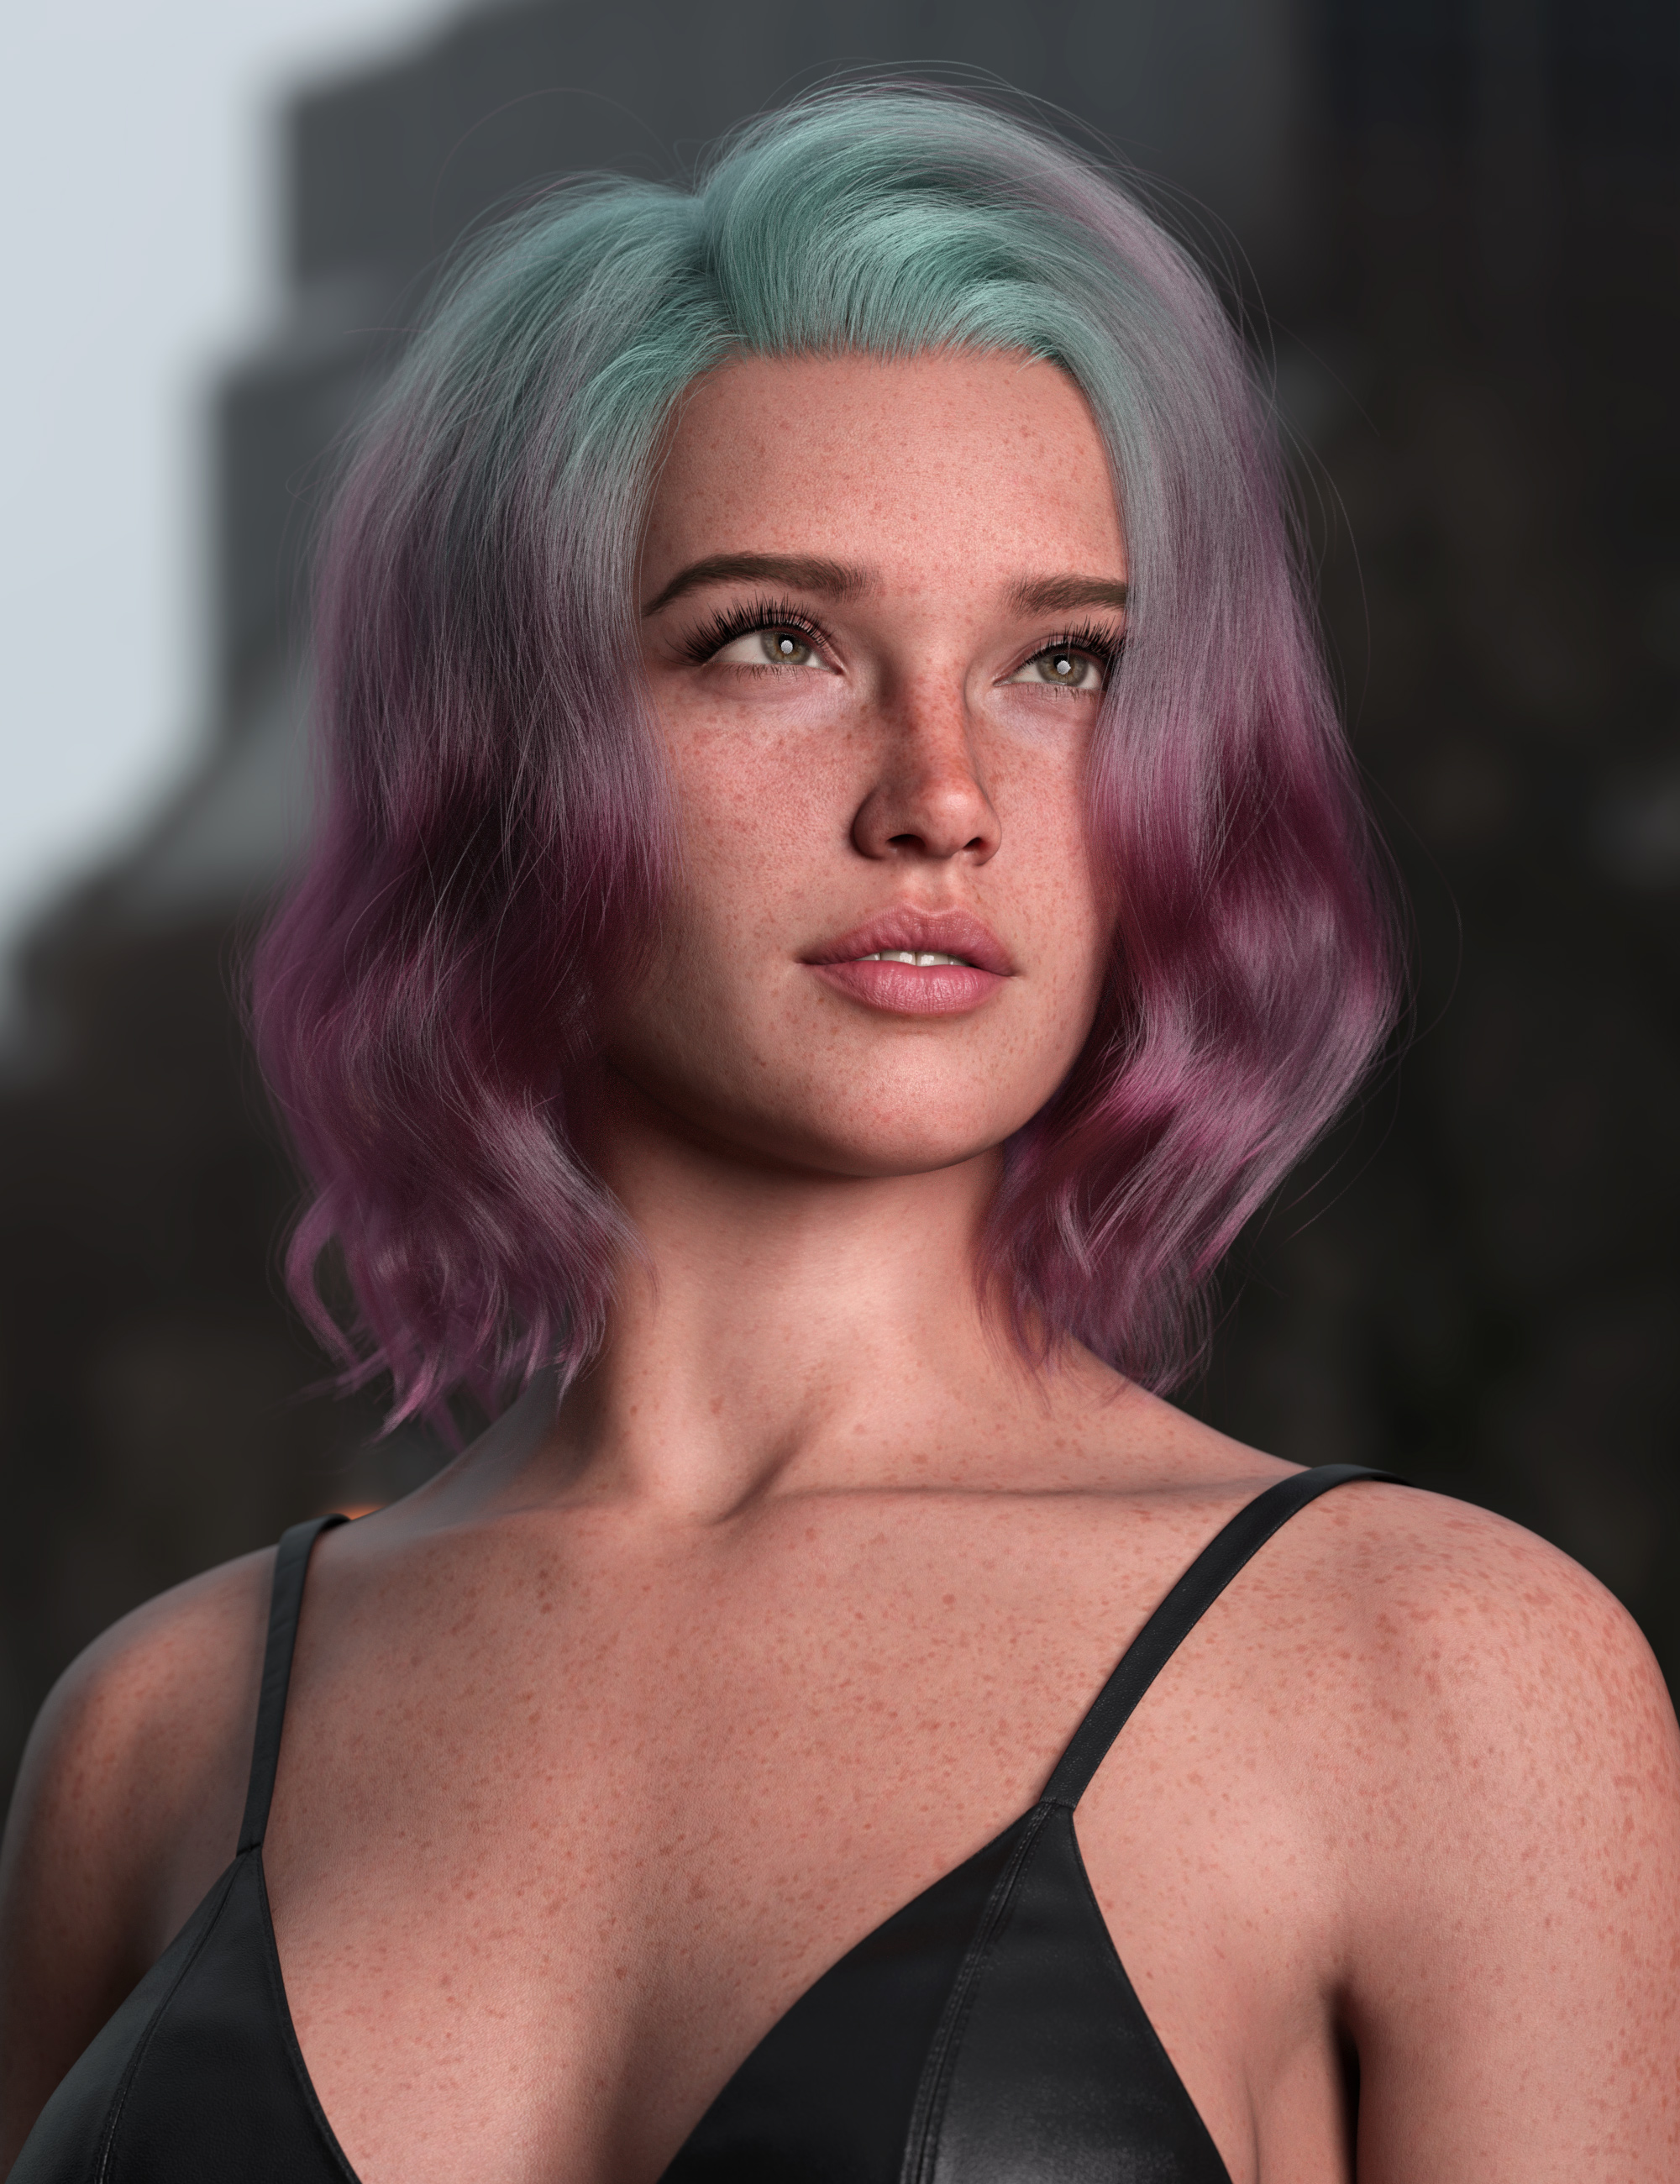 dForce Strand-Based Top Wave Long Bob Hair Color Expansion by: outoftouch, 3D Models by Daz 3D